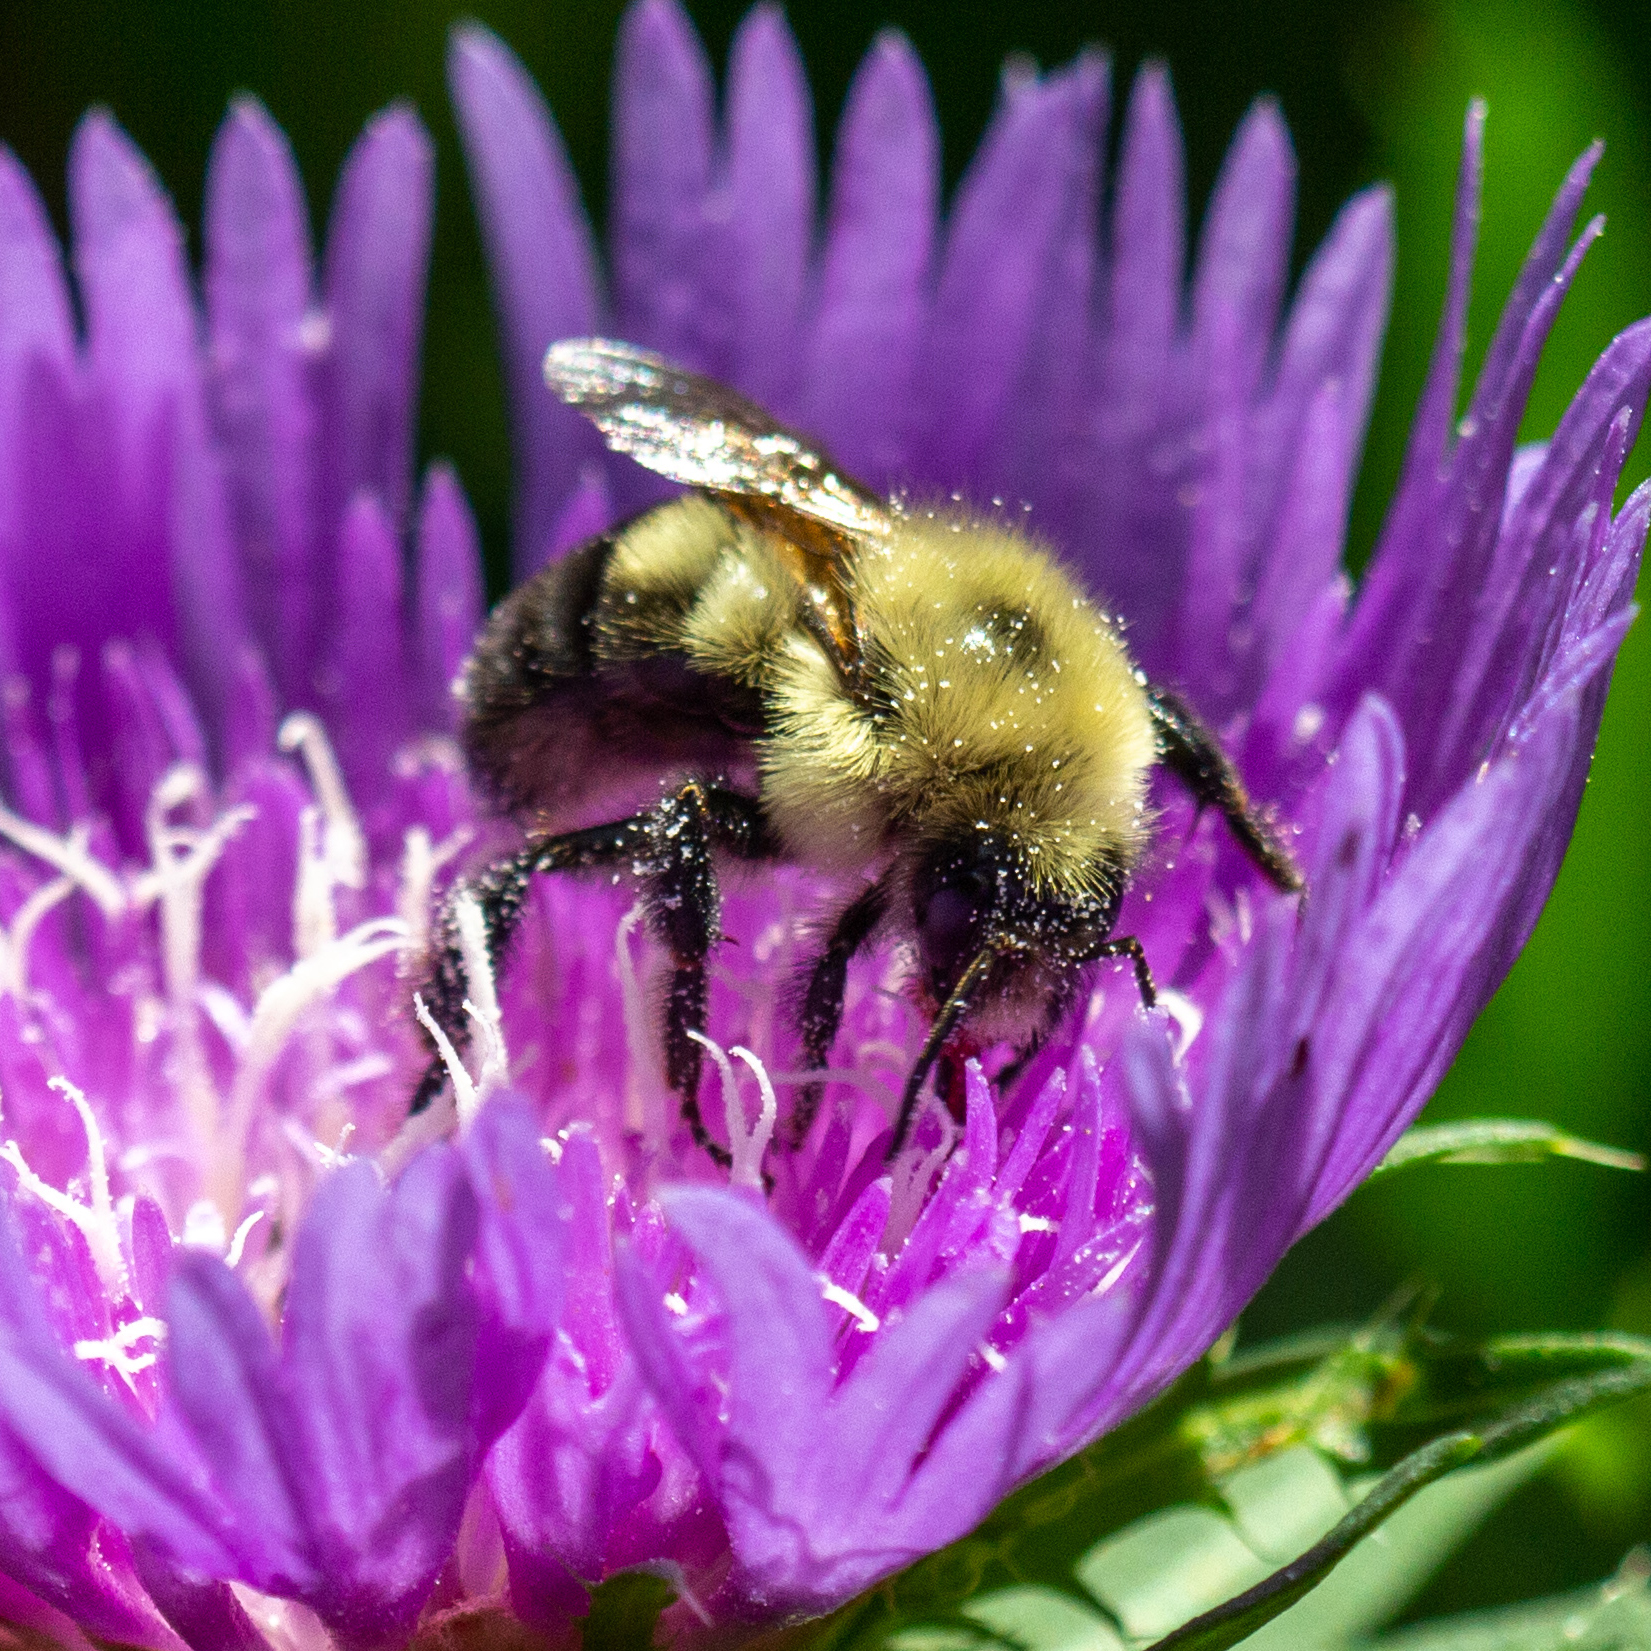 Native pollinators like this Eastern Bumblee are attracted to the vibrant, violet purple blooms of Stokesia laevis, or Stoke's Aster.